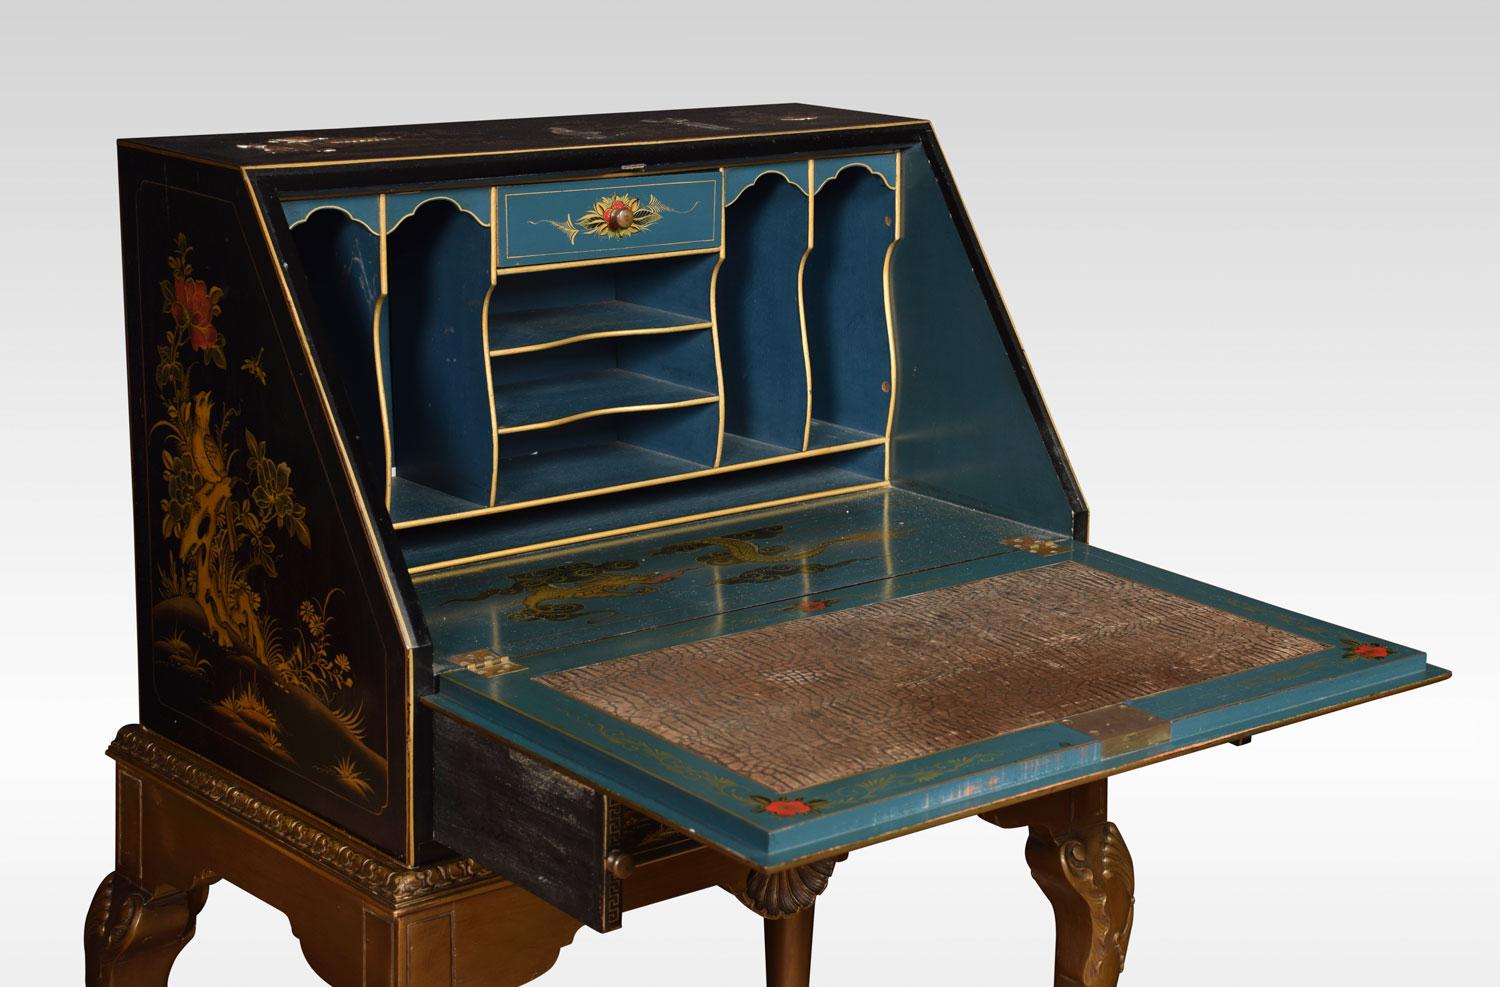 Black Lacquer Chinoiserie Decorated Bureau on Stand 1